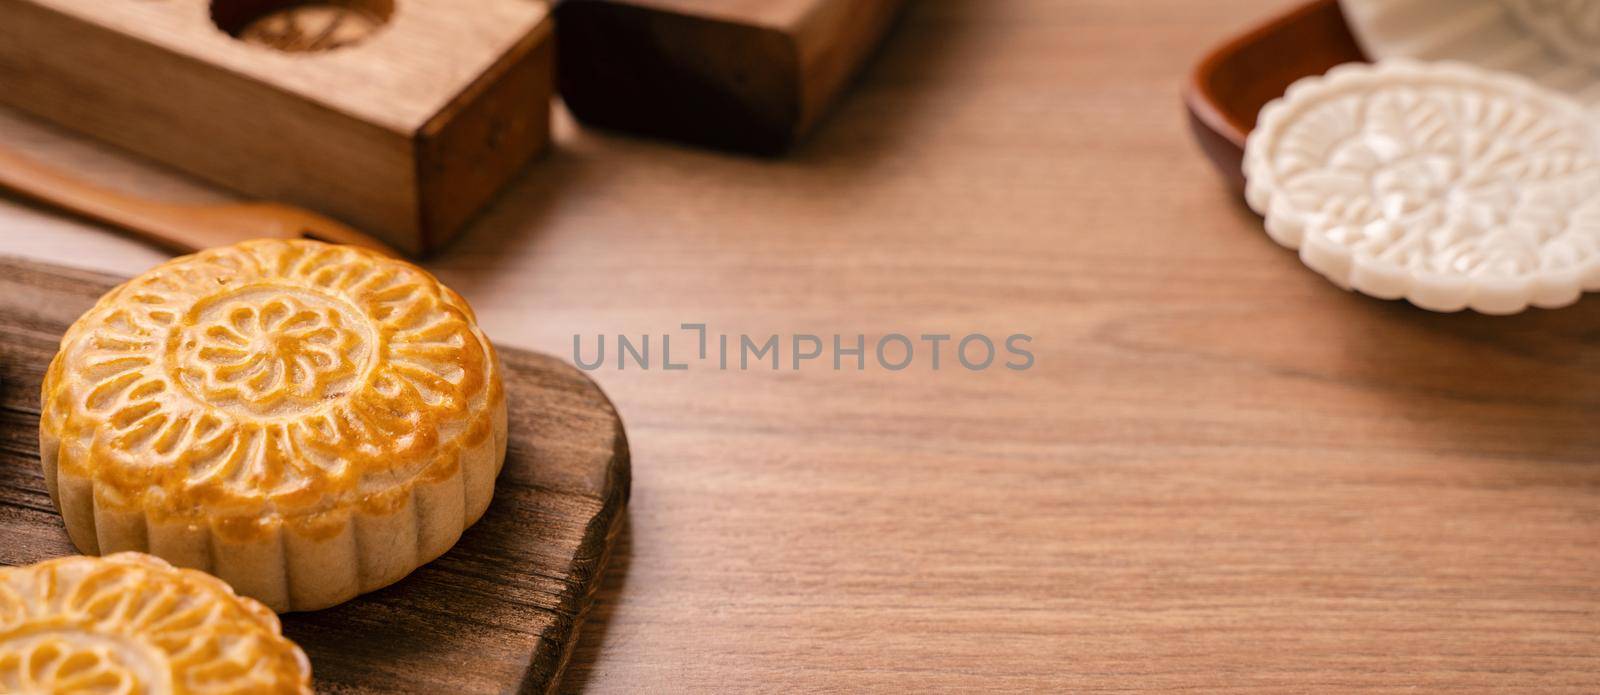 Round shaped fresh baked moon cake pastry - Chinese moonckae for Mid-Autumn Moon Festival on wooden background and serving tray, close up, copy space by ROMIXIMAGE